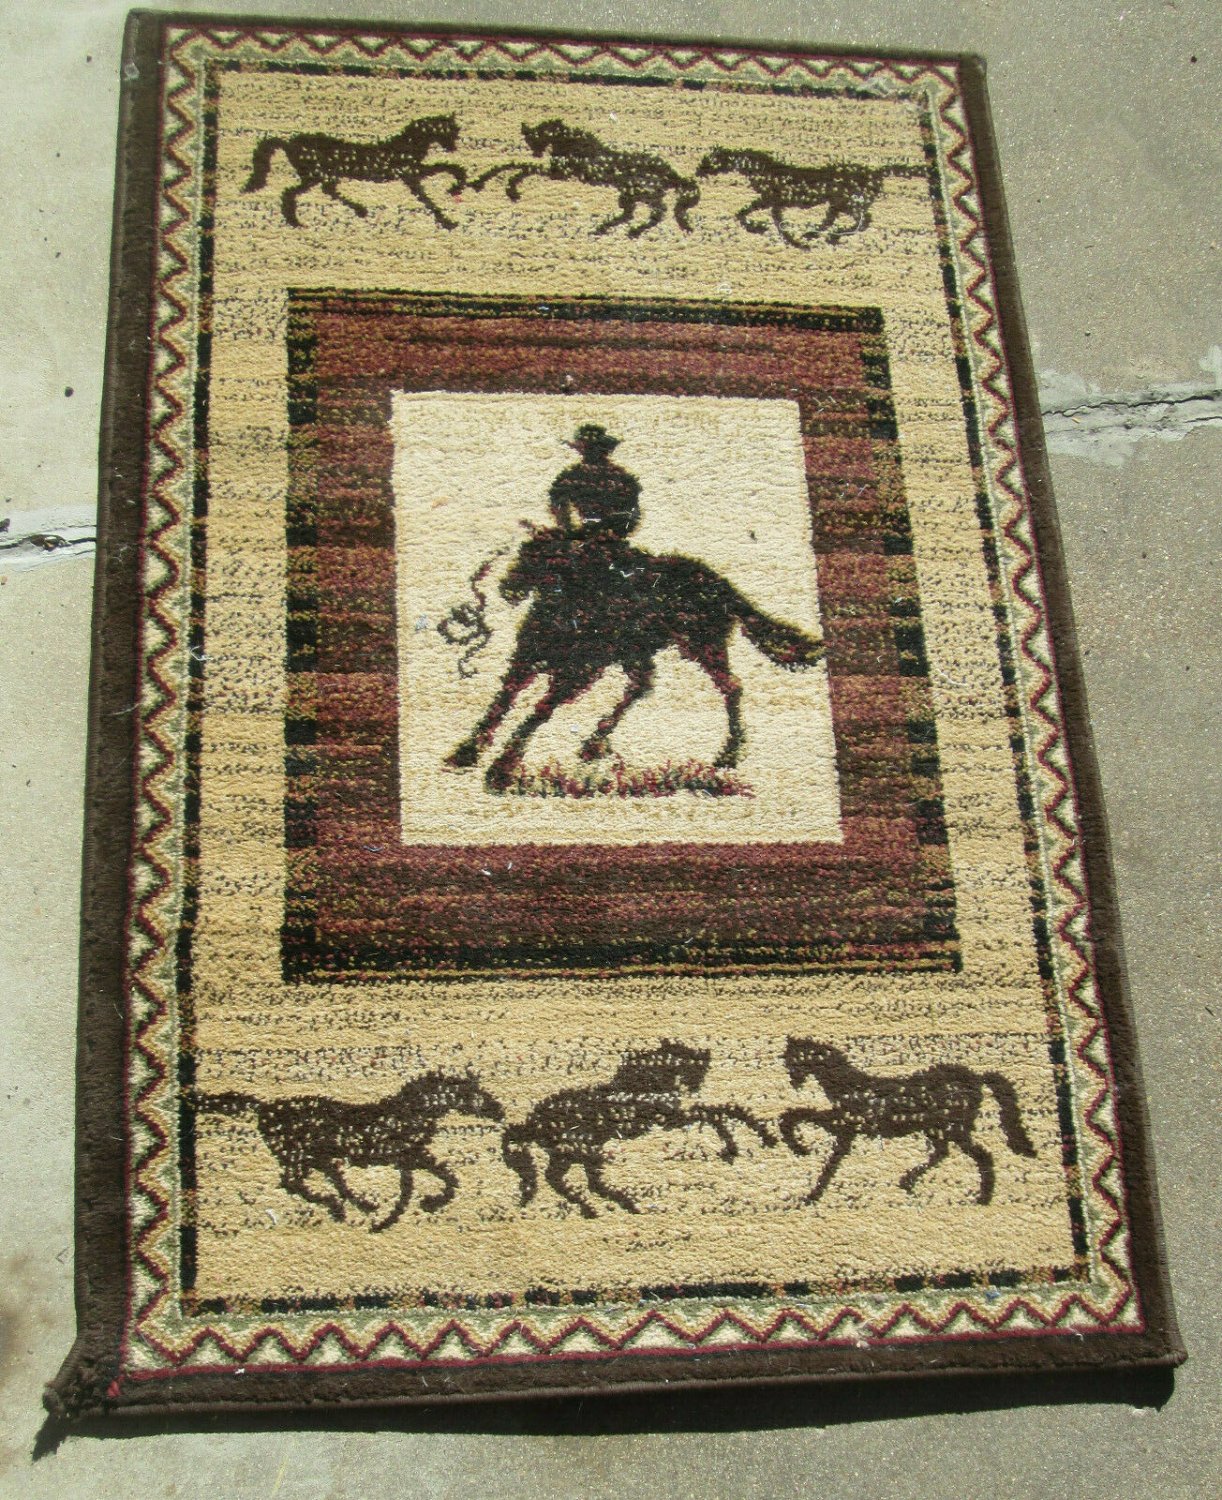 32" X 48" DYNASTY COLLECTION BROWN RUG WESTERN HORSES RIDERS RUNNER MADE TURKEY